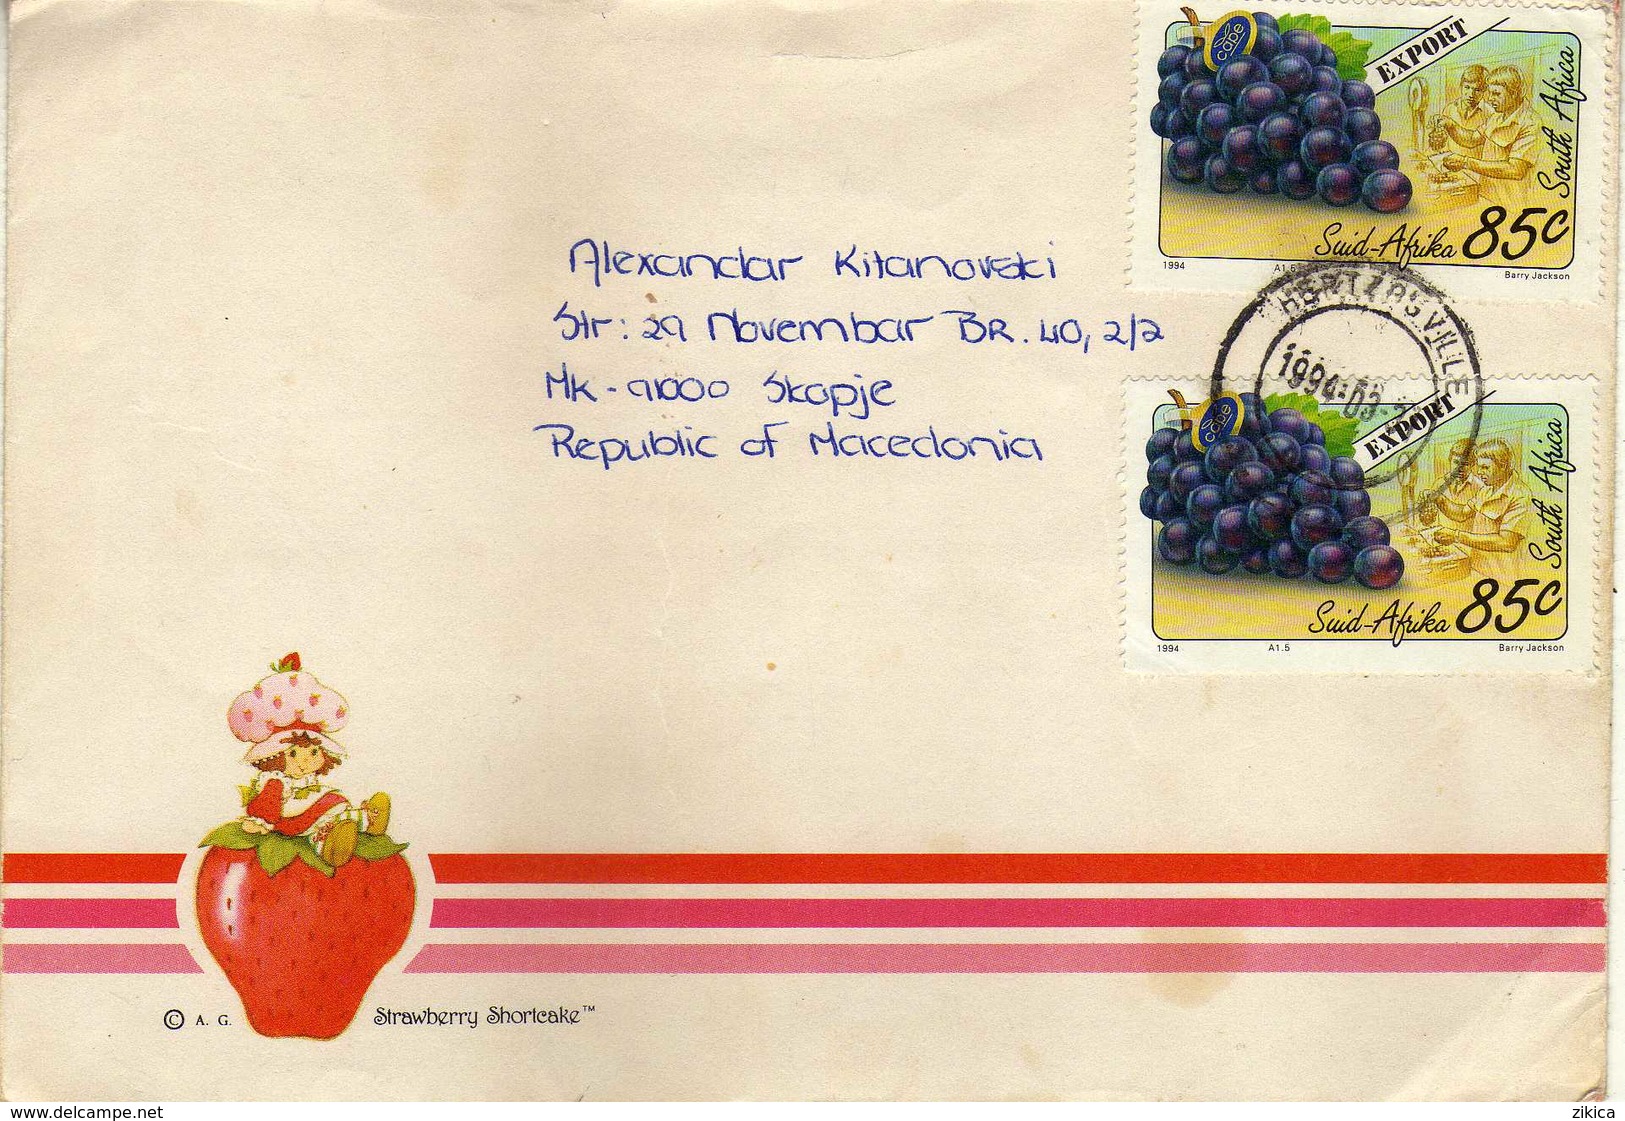 South Africa Letter Via Macedonia 1994 Export Fruits.Flora/Fruits/Grapes - Covers & Documents